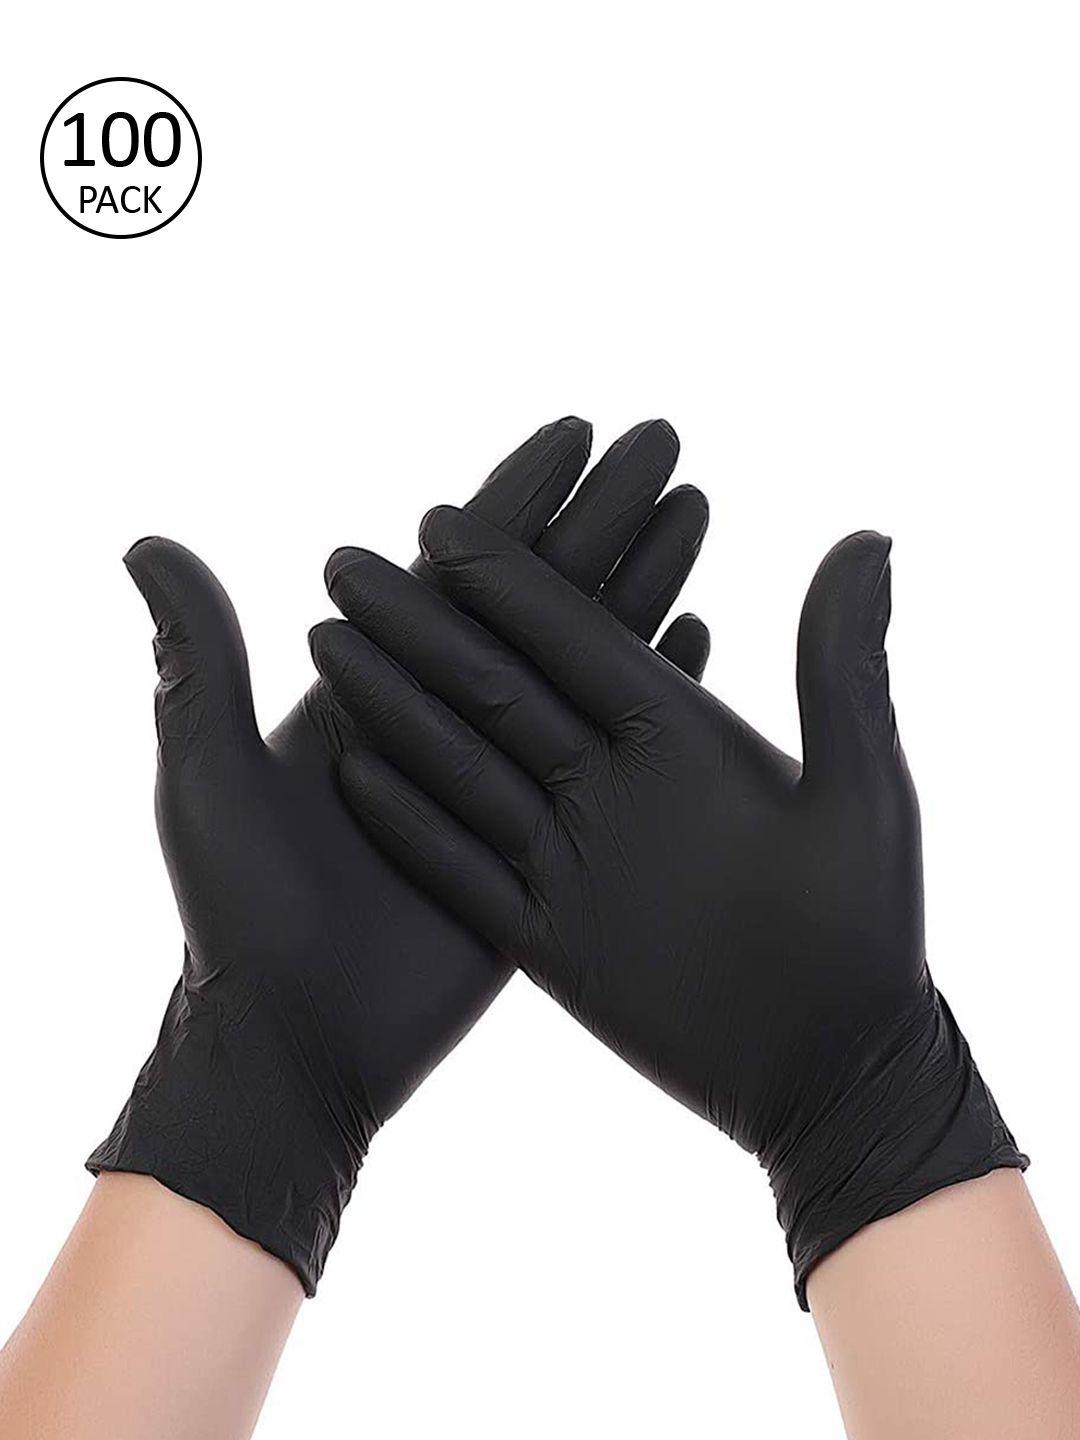 london fashion hob unisex pack of 100 black solid surgical disposable hand gloves